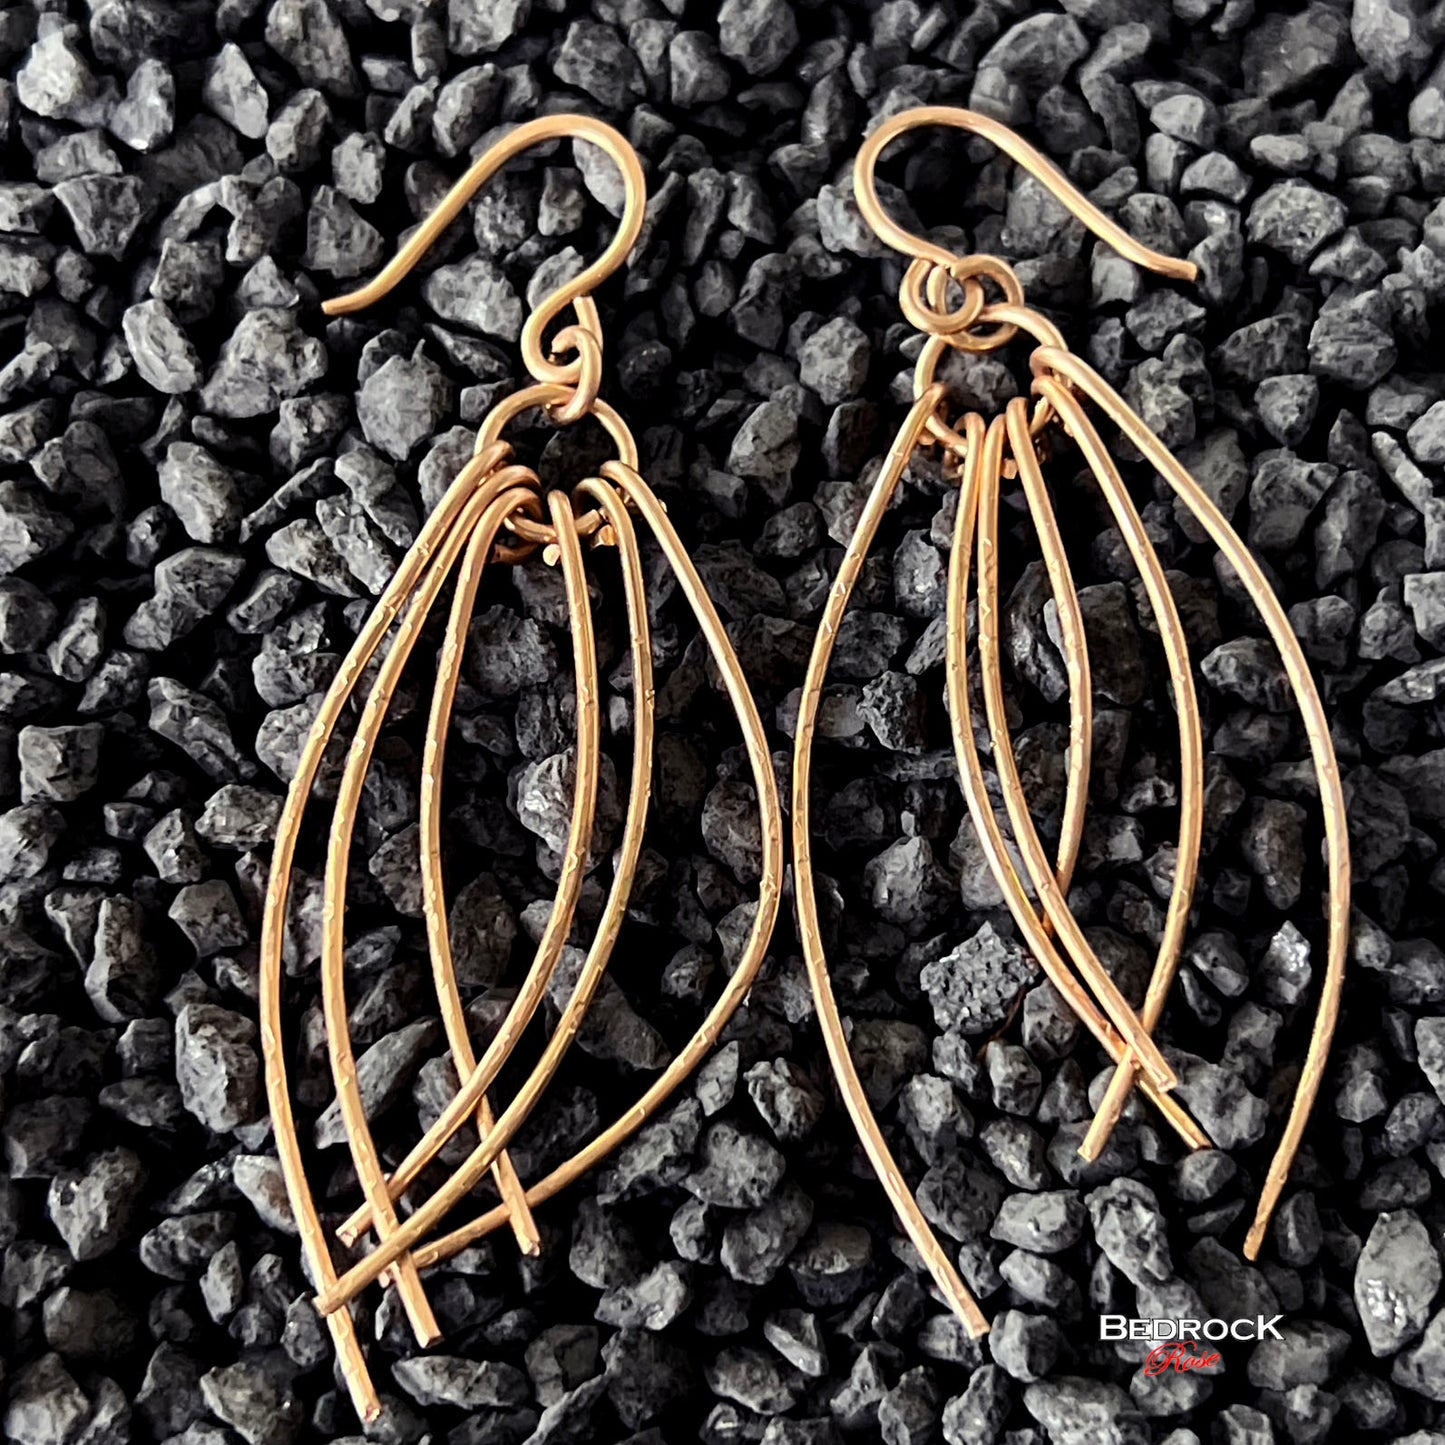 Warm Bronze Wires Curving Together Dangling Earrings, Nickel Free Bronze Fashion Earrings, Gift for her